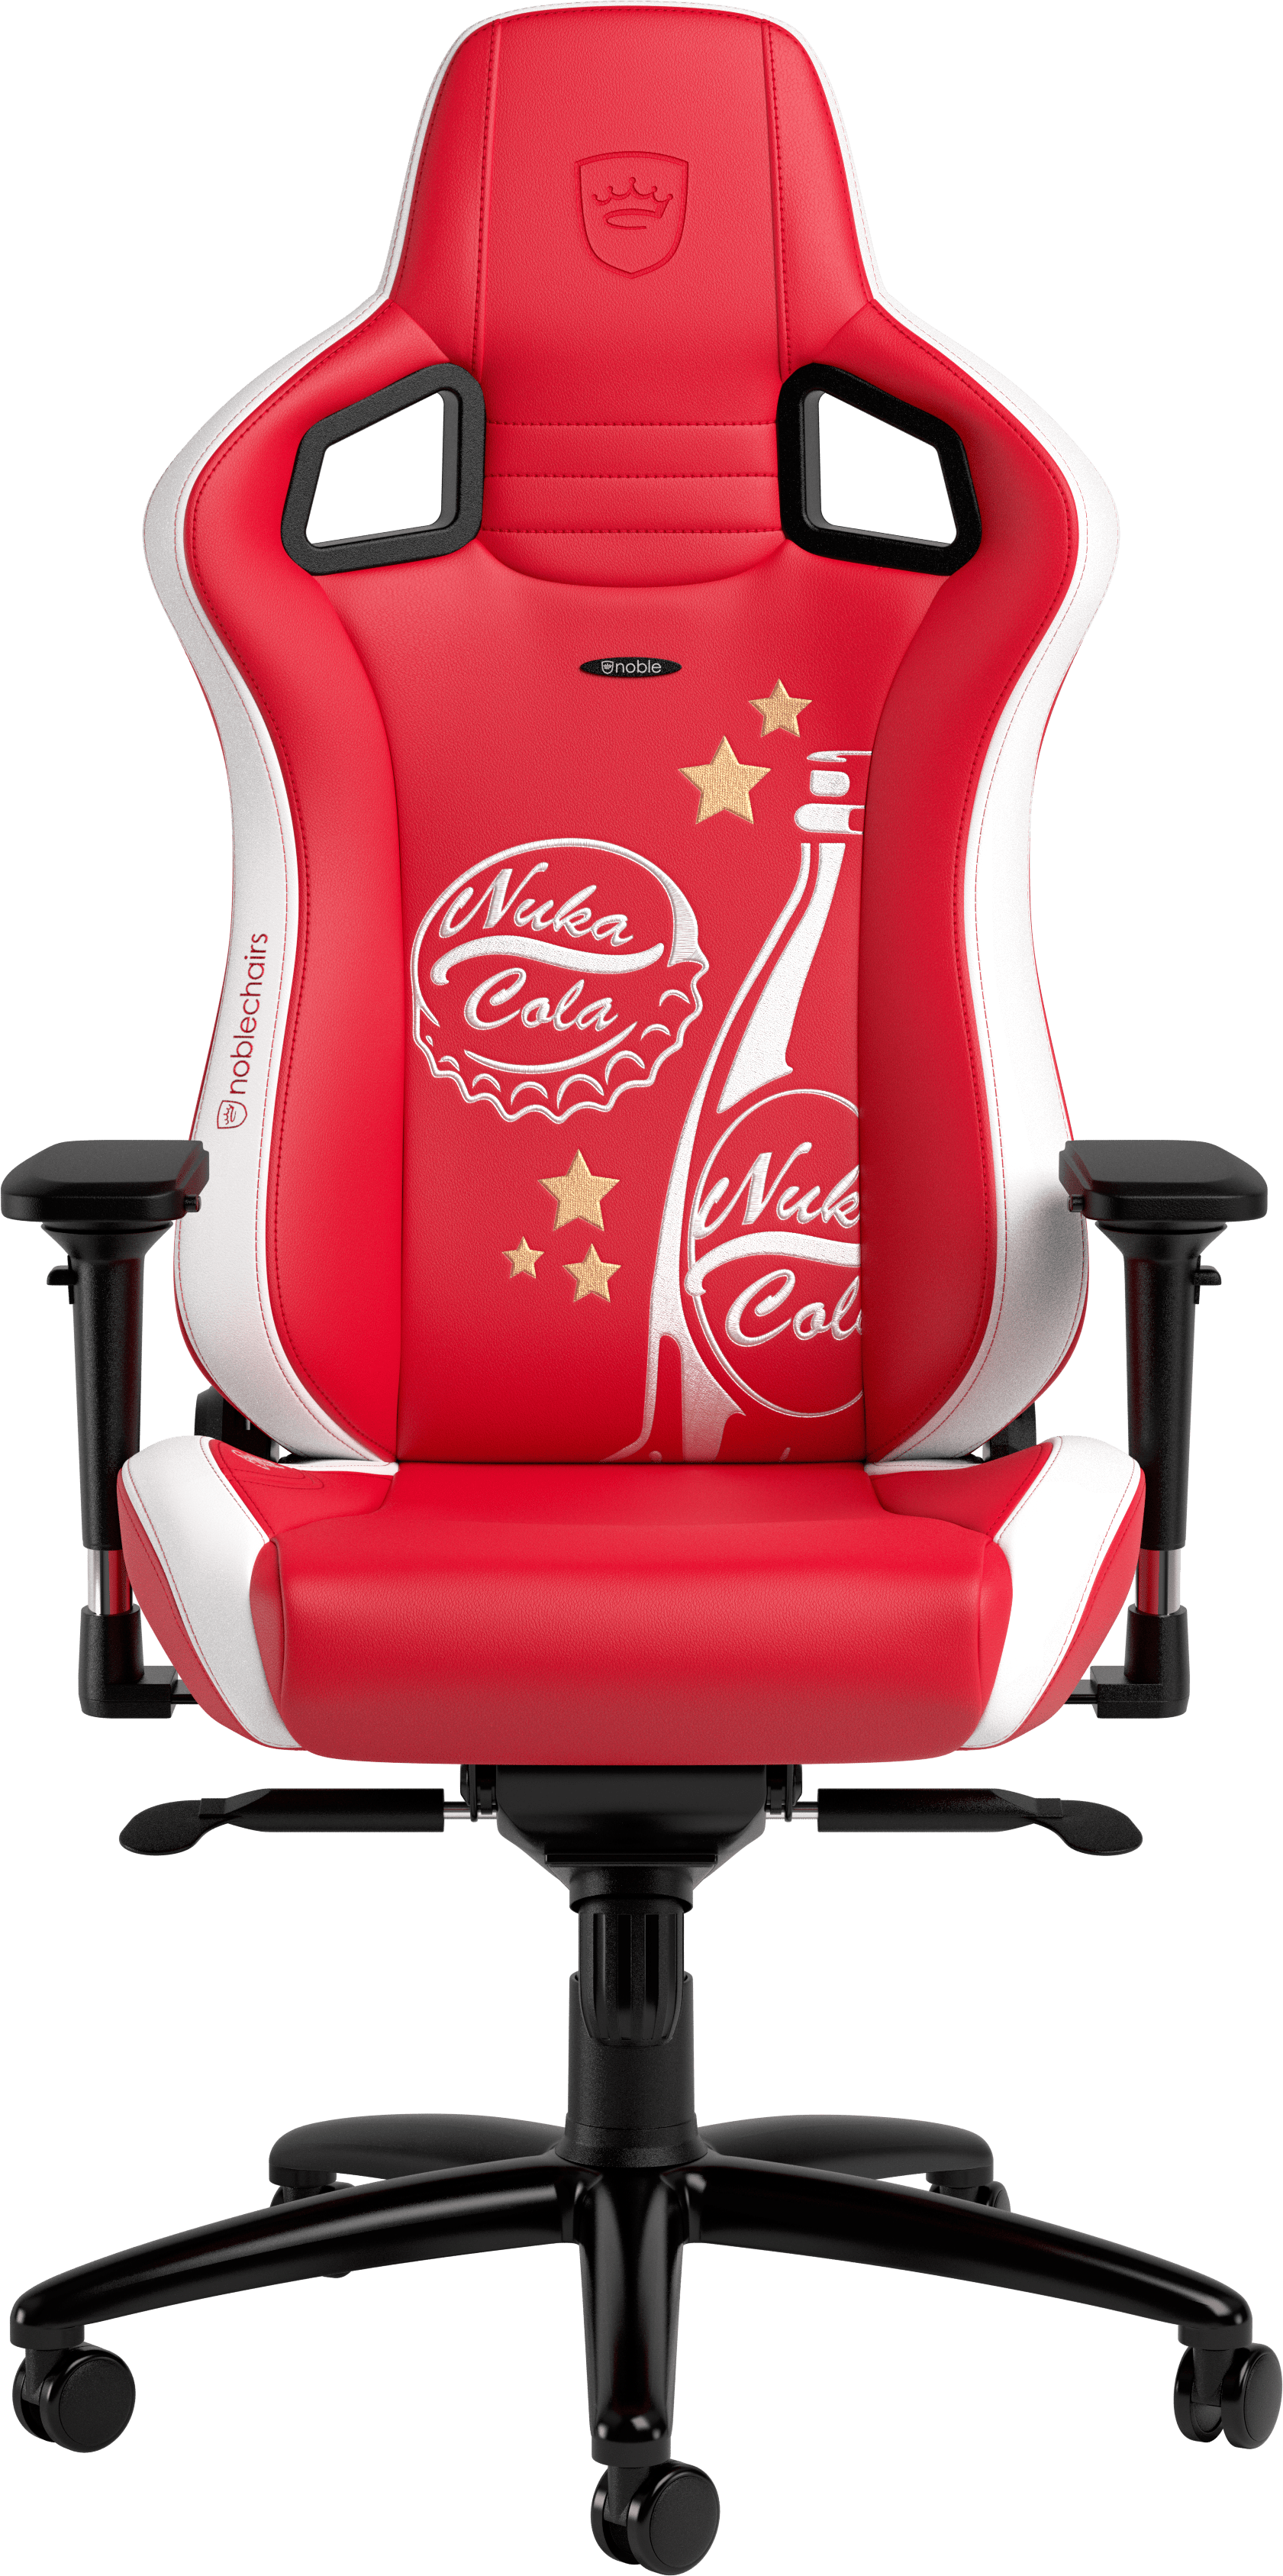 precision manufacturing noblechairs EPIC Fallout Nuka-Cola Edition